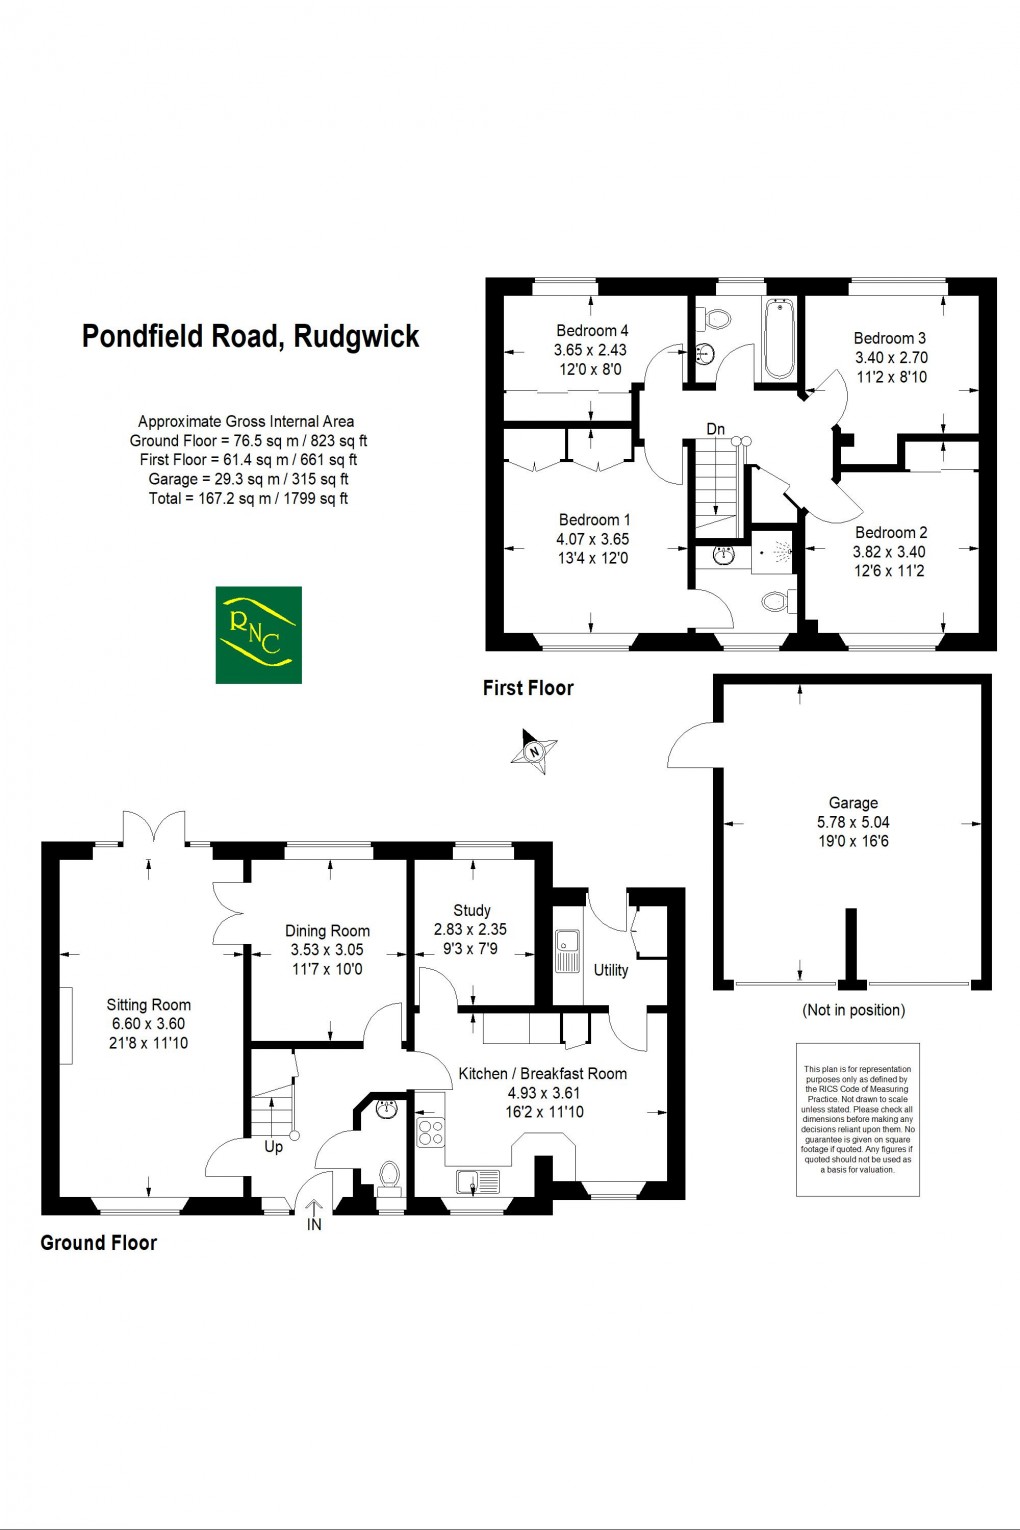 Floorplan for Pondfield Road, Rudgwick